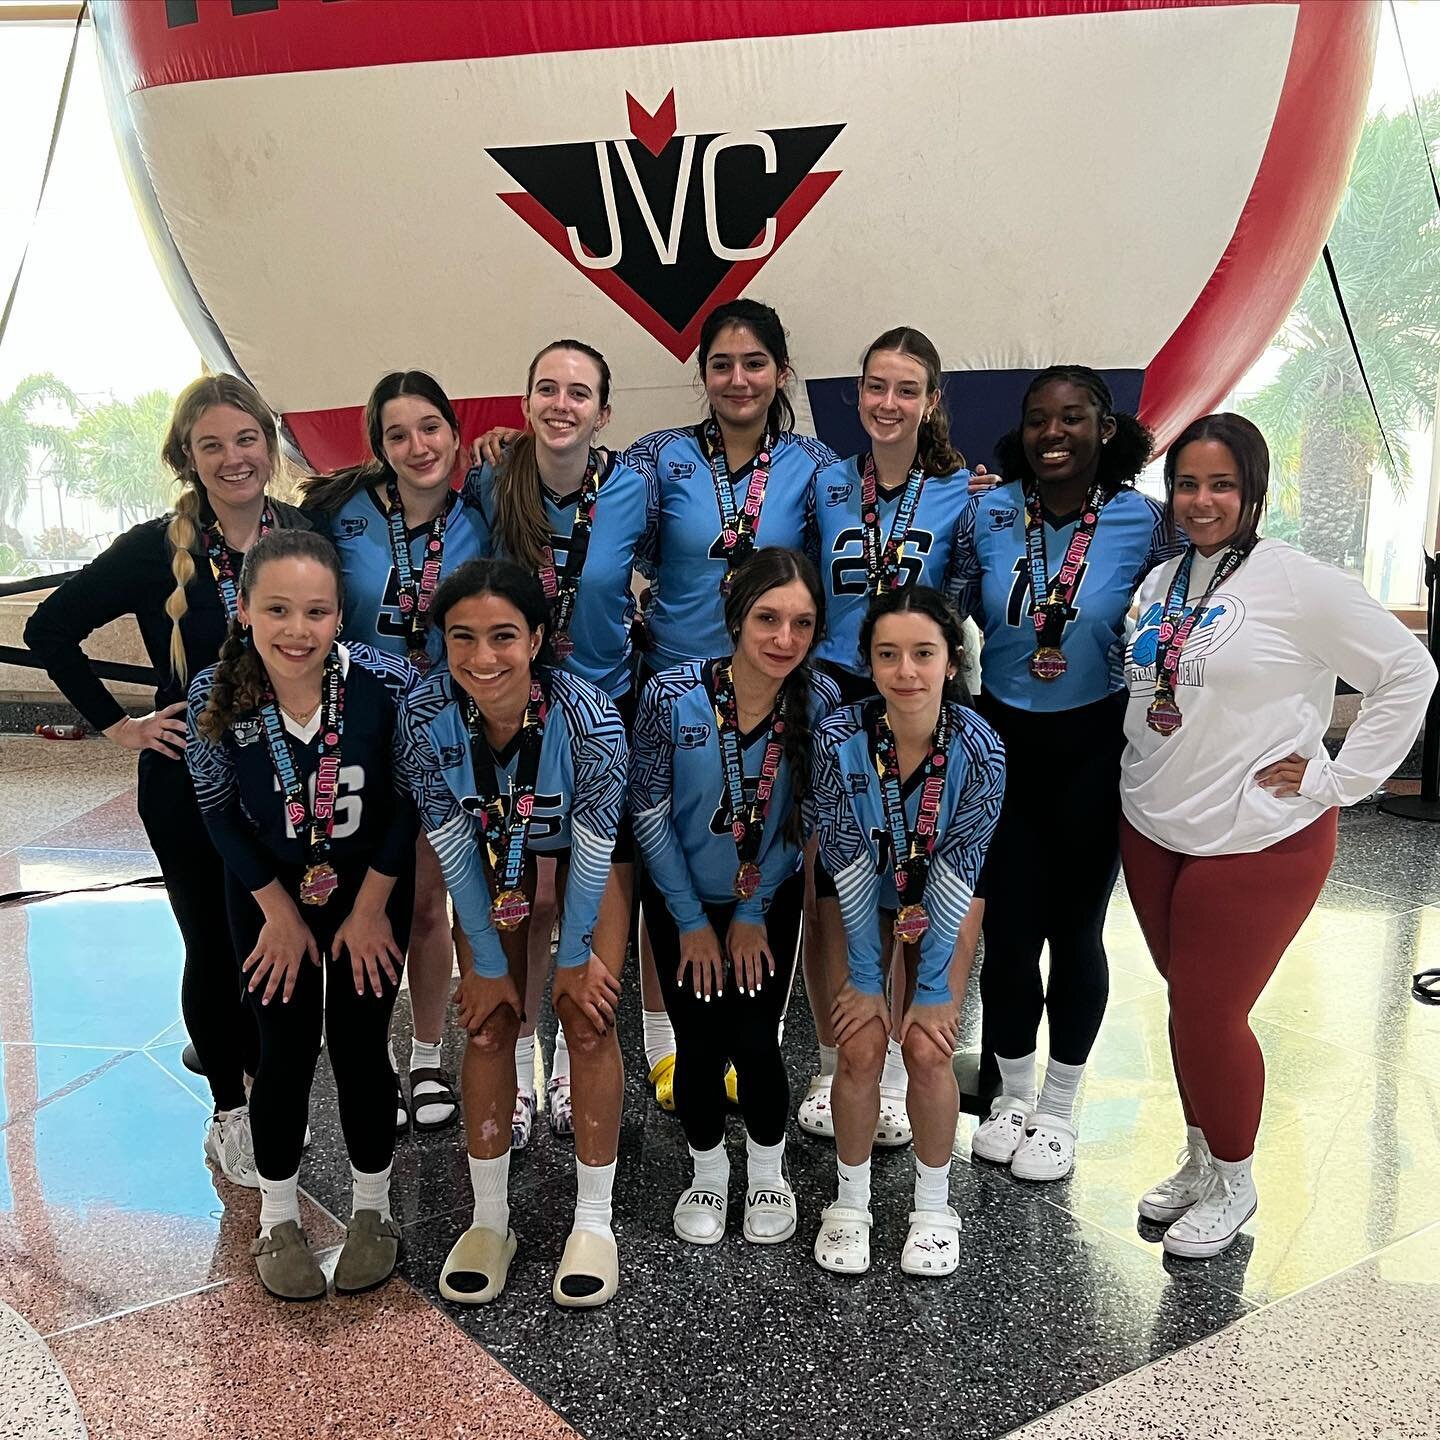 15 Sam - 3rd in gold at the @jvctournaments Tampa Slam